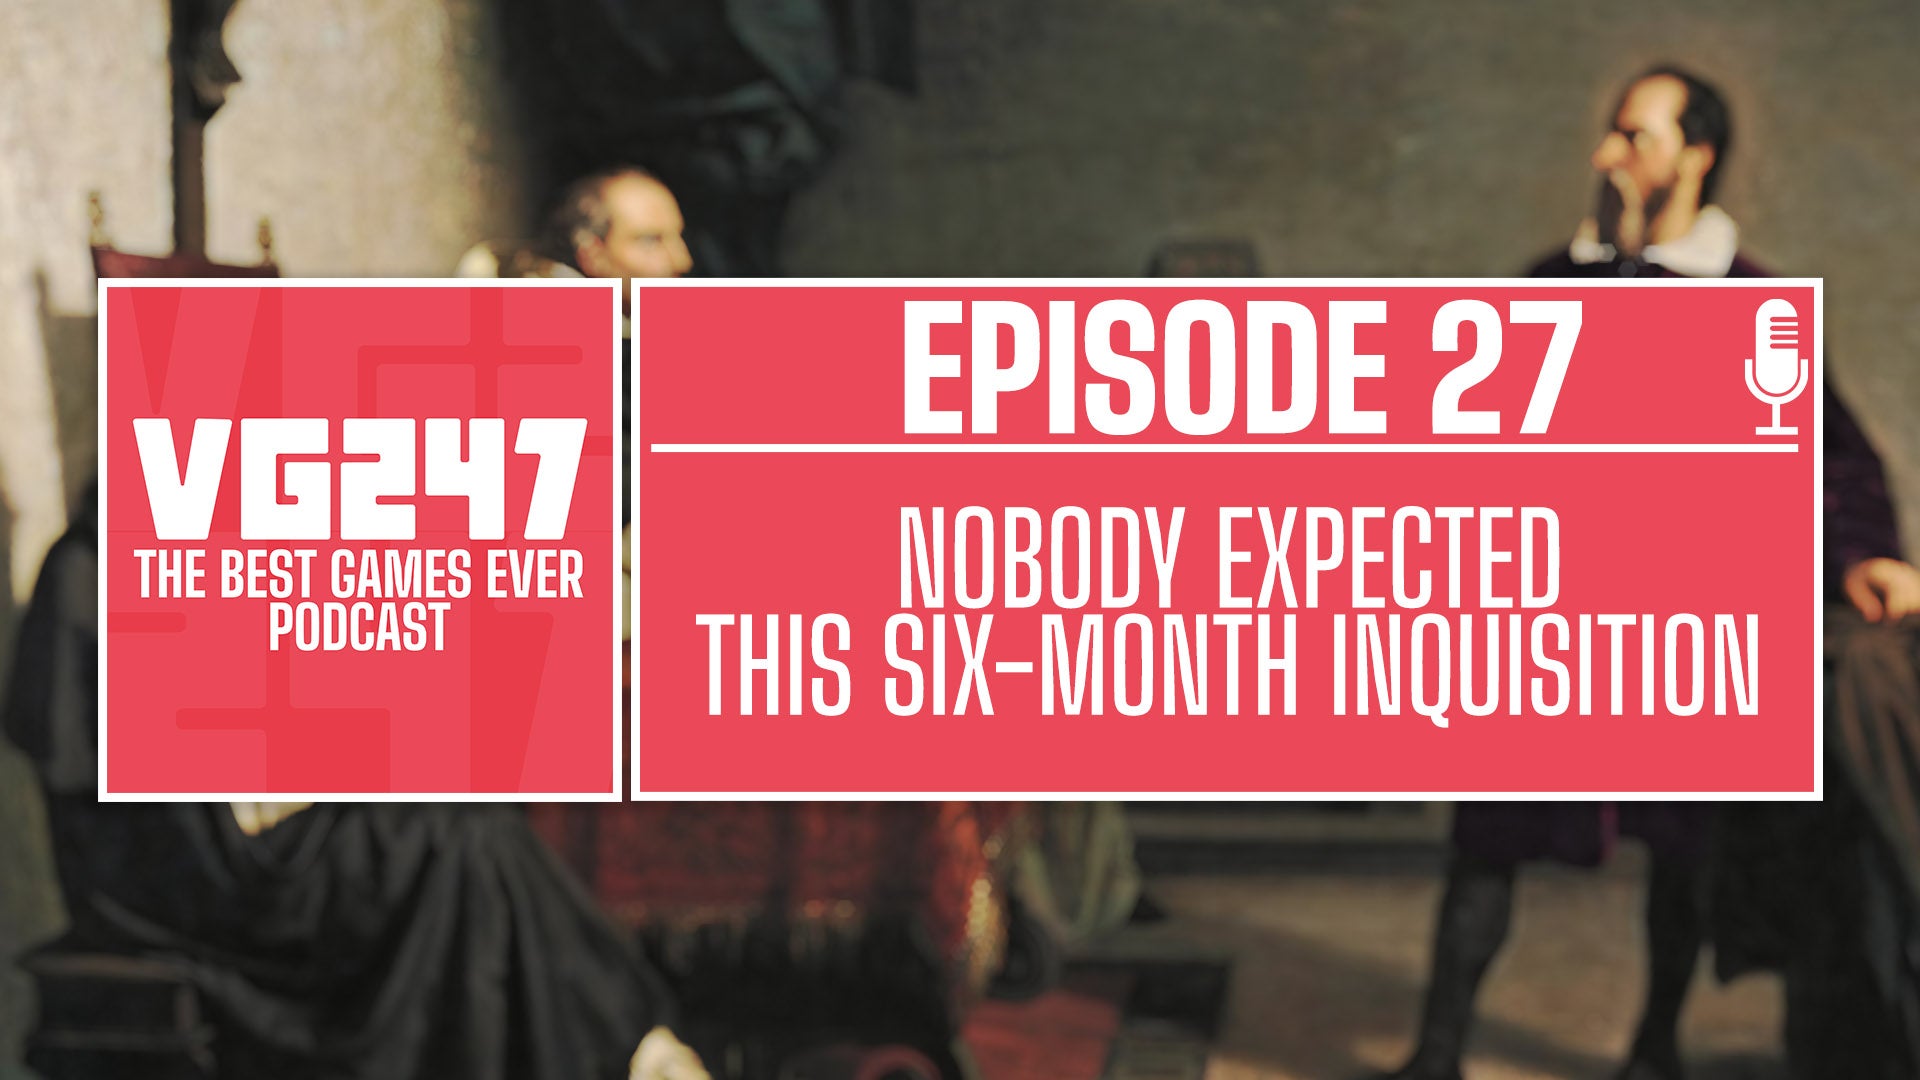 Image for VG247's The Best Games Ever Podcast: The 6-month Inquisition Special